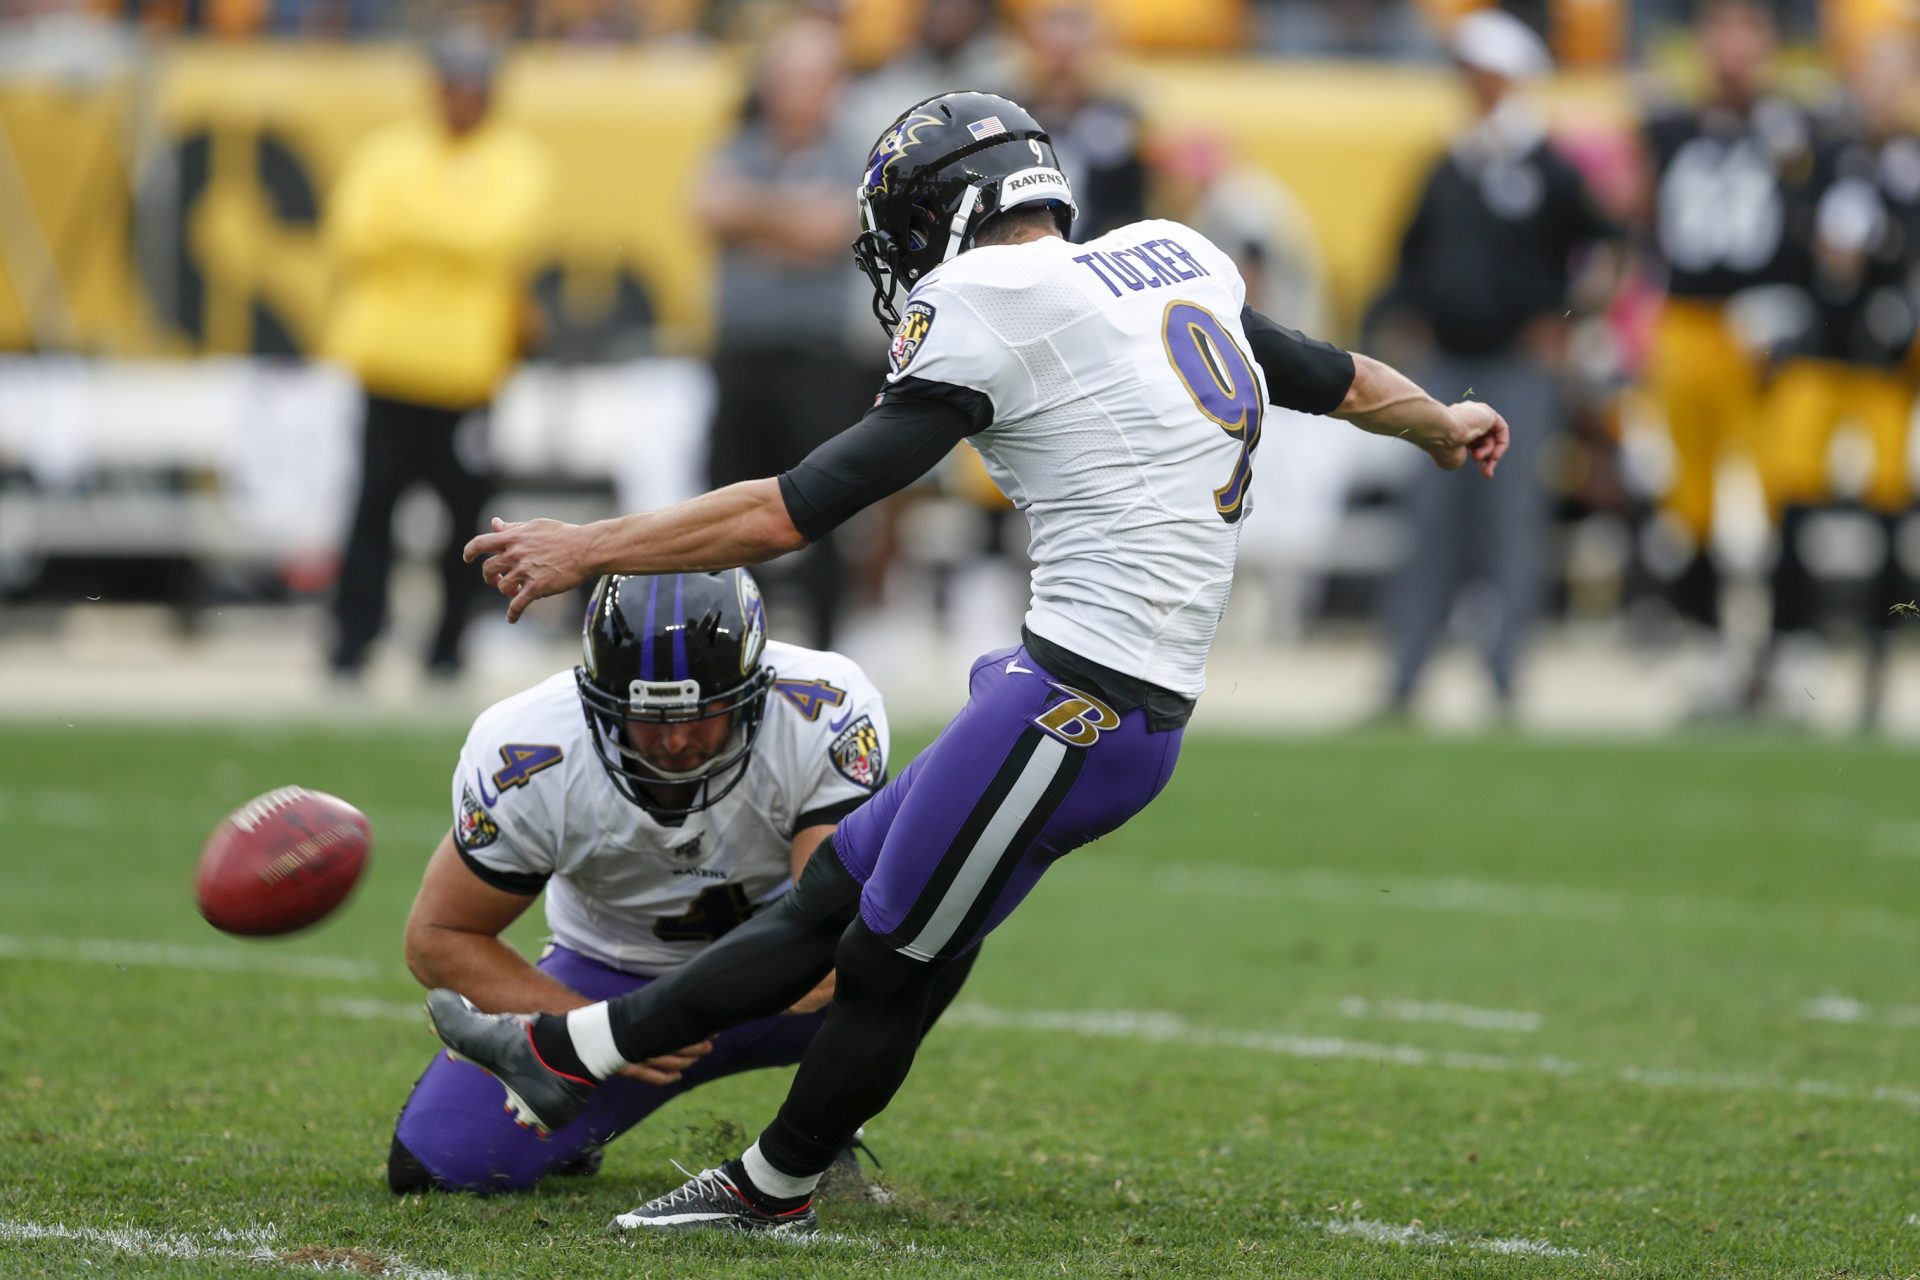 Rudolph exits after scary hit, Ravens edge Steelers in OT 